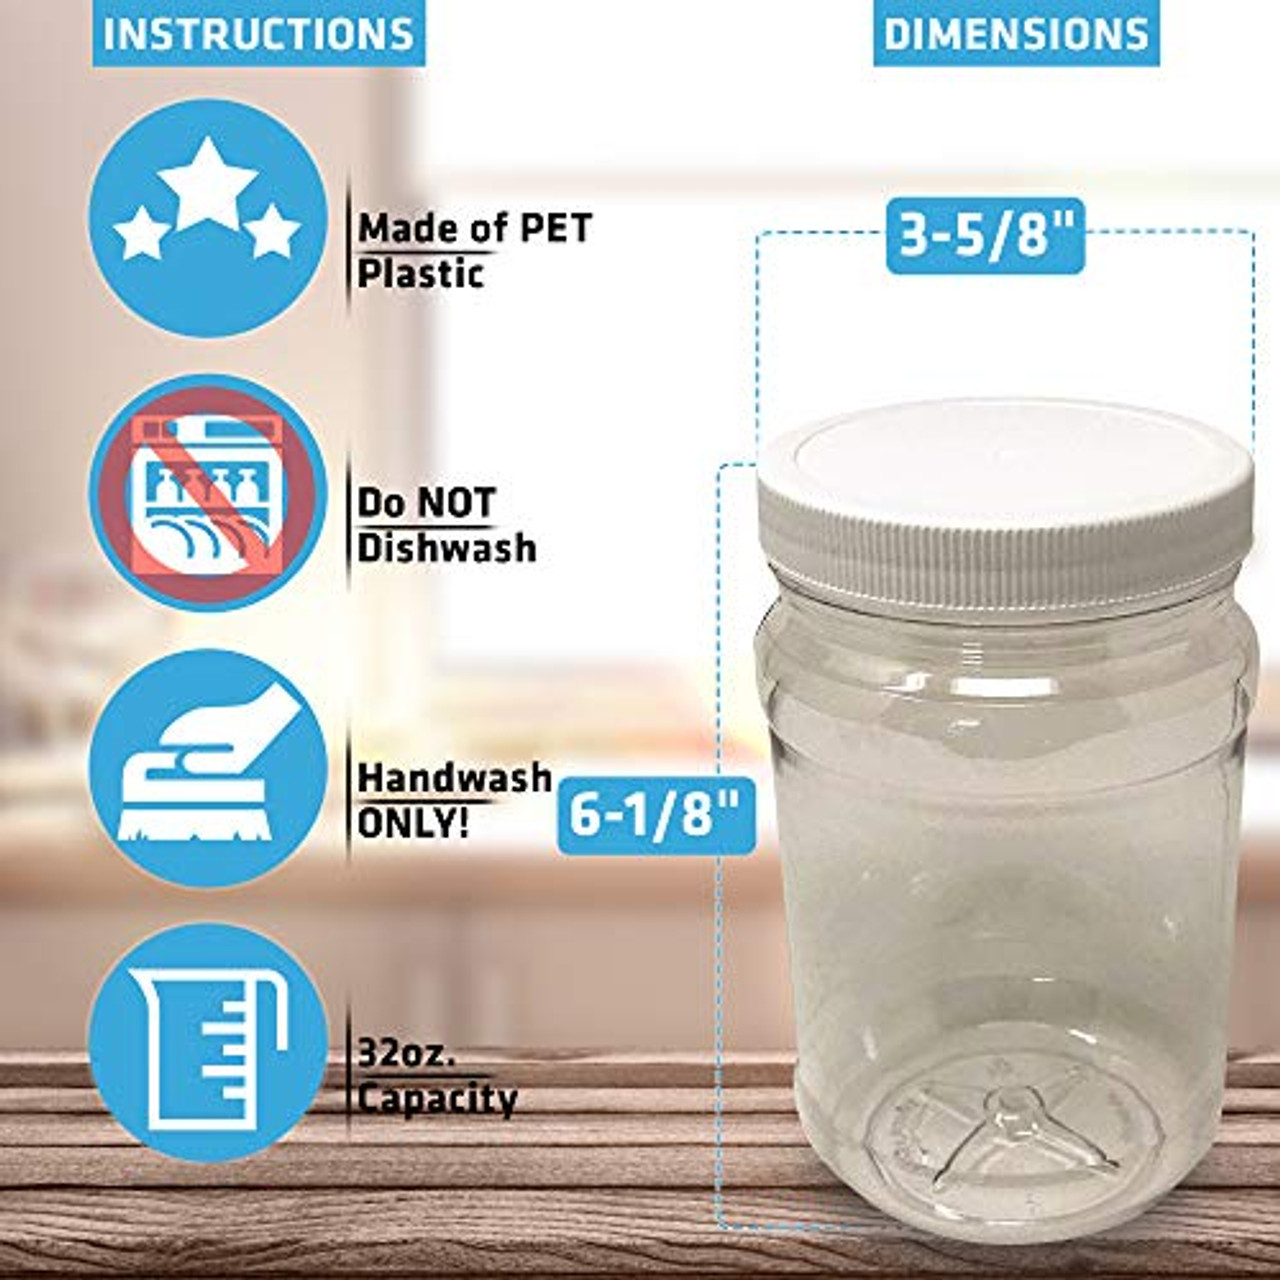 CSBD 16 Oz Clear Plastic Mason Jars With Ribbed Liner Screw On Lids, Wide  Mouth, ECO, BPA Free, PET Plastic, Made In USA, Bulk Storage Containers, 12